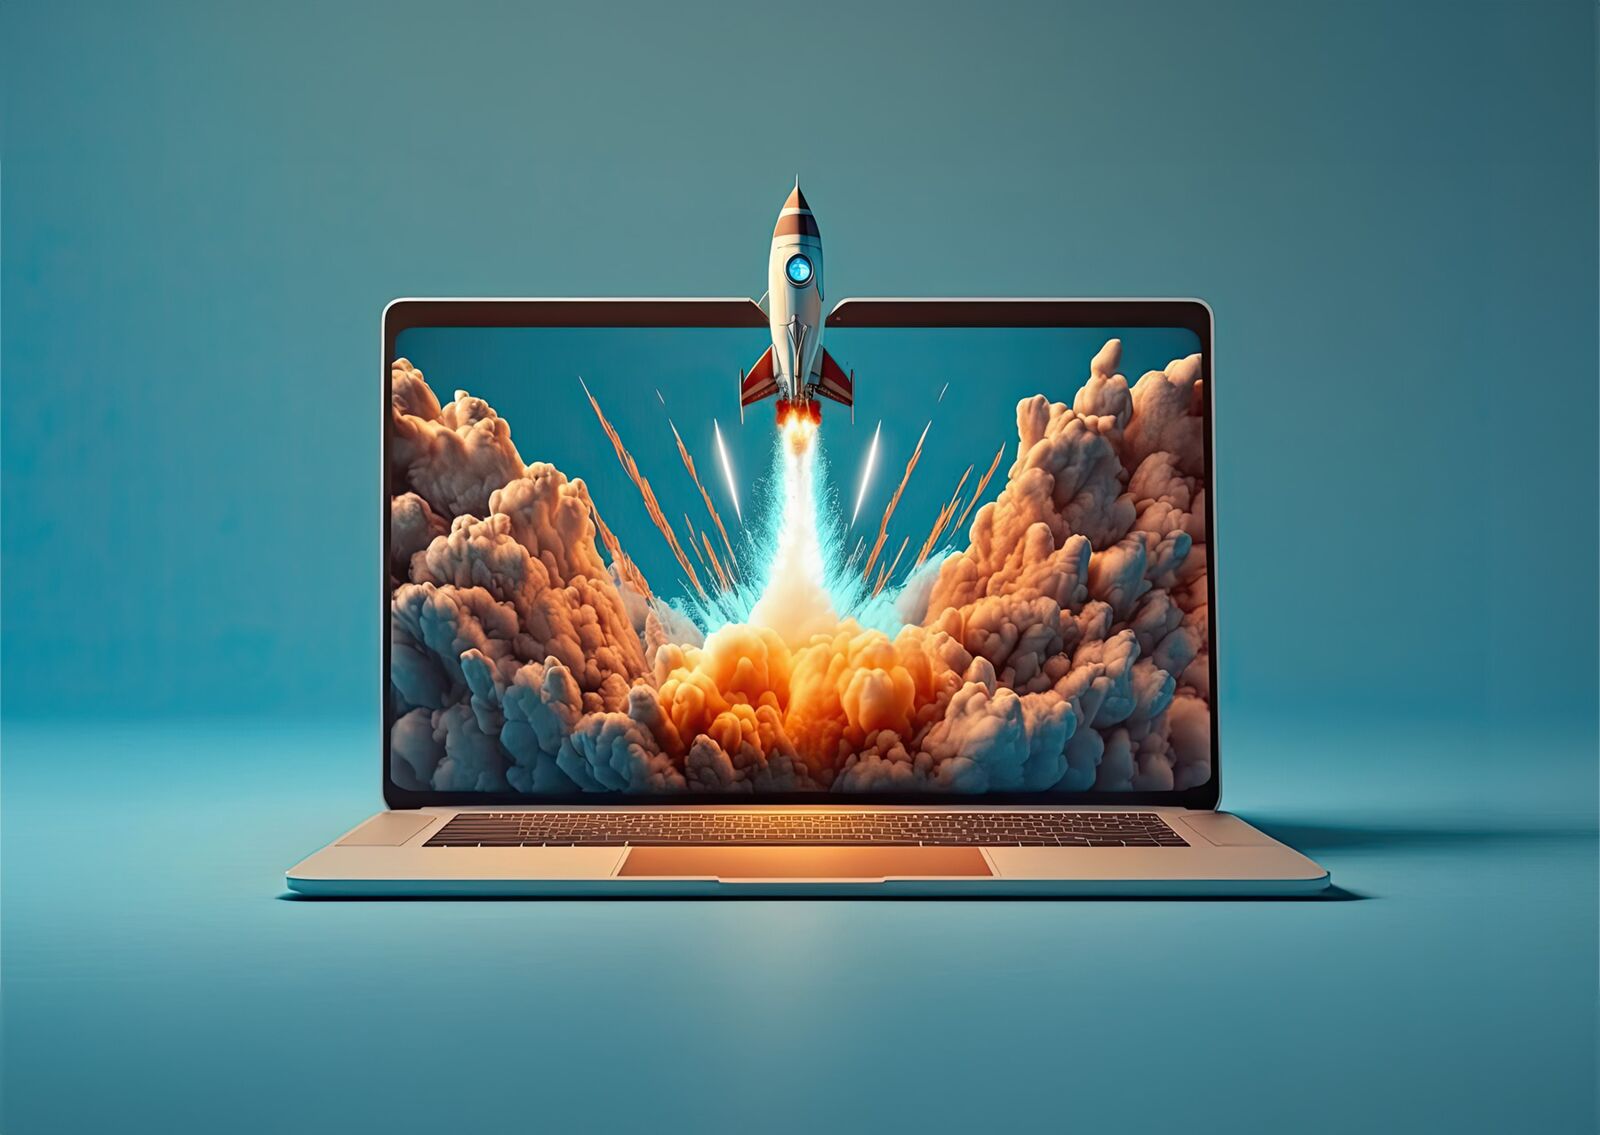 Animated image of a rocket flying out of a laptop screen